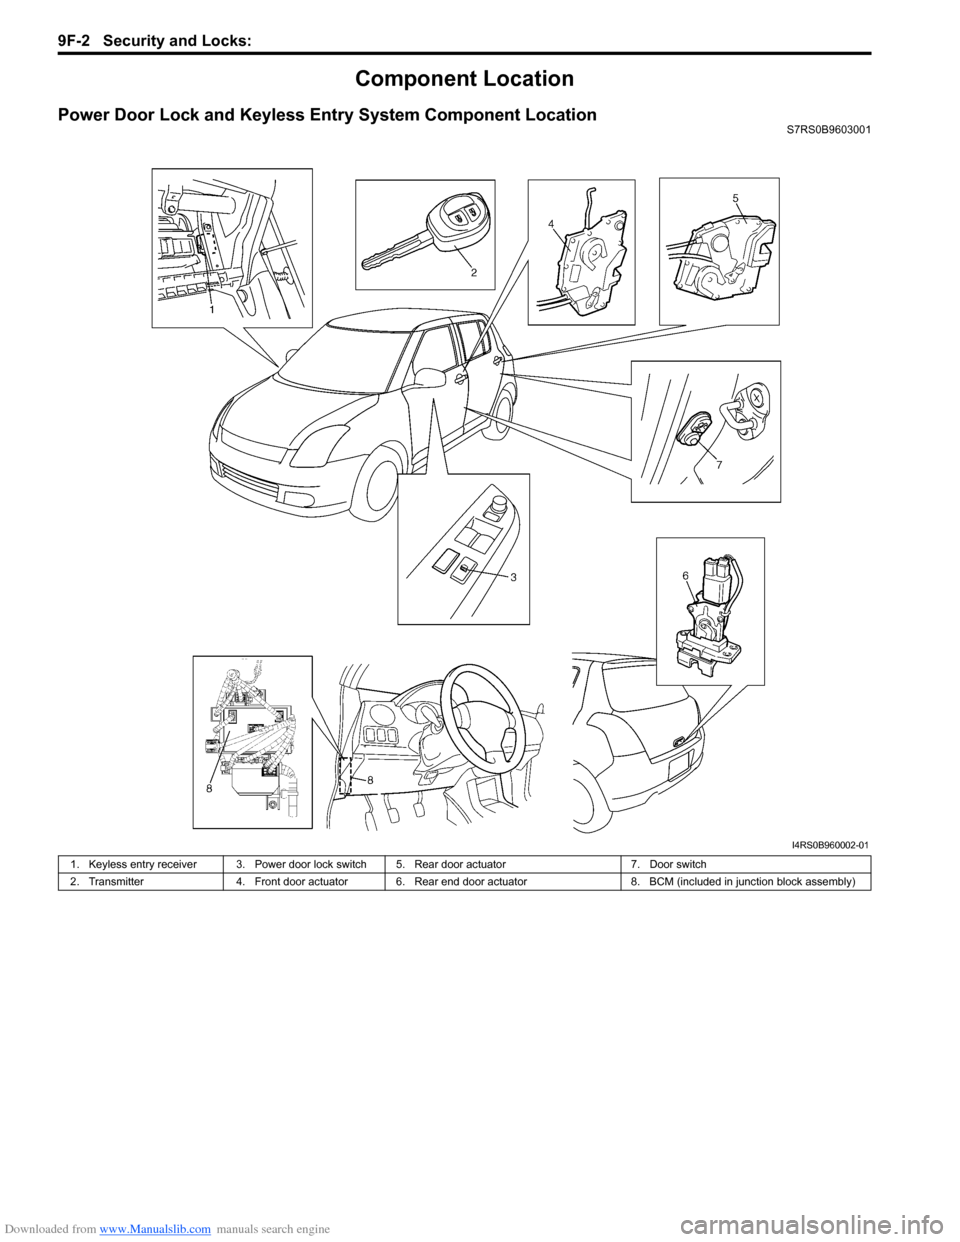 SUZUKI SWIFT 2005 2.G Service Workshop Manual Downloaded from www.Manualslib.com manuals search engine 9F-2 Security and Locks: 
Component Location
Power Door Lock and Keyless Entry System Component LocationS7RS0B9603001
I4RS0B960002-01
1. Keyles